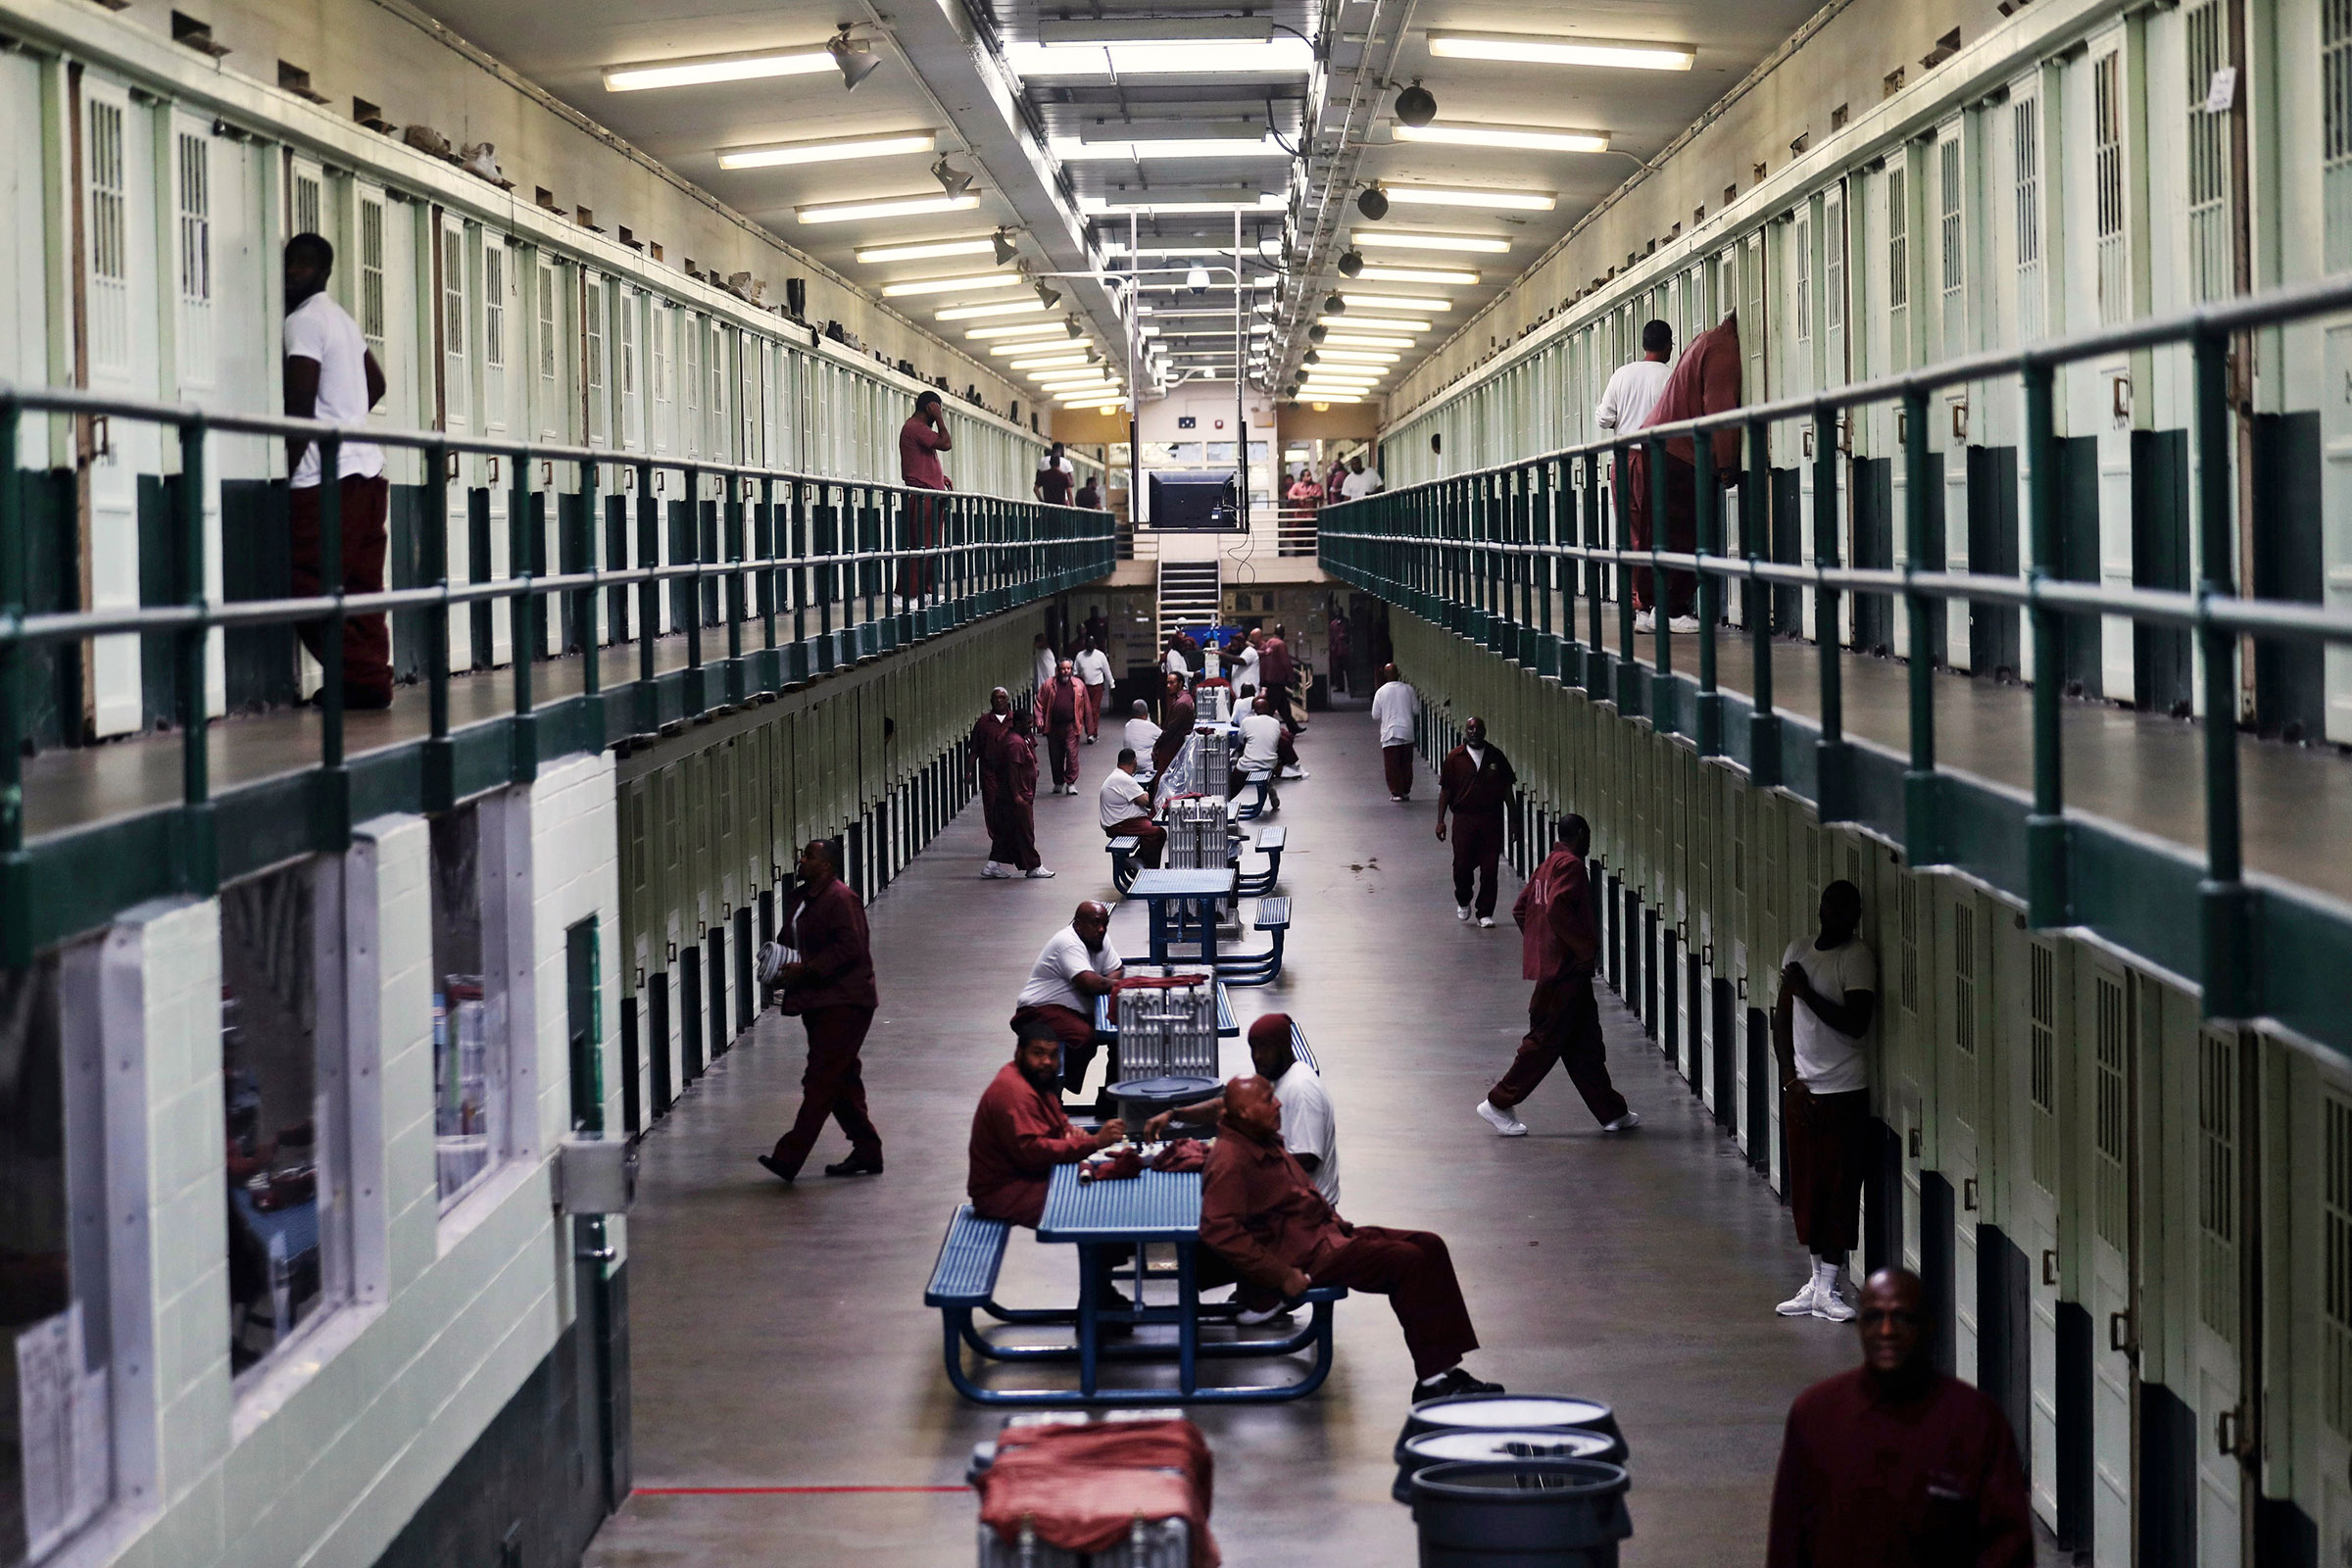 Inmates in a block at the State Correctional Institution at Graterford in Graterford, Pa. on Sept. 7, 2017. More than 2,500 inmates from the 89-year-old state prison at Graterford were transferred to a $400 million State Correctional Institution at Phoenix prison in Collegeville, Pa., which began on July 11, 2018, according to the Pennsylvania Department of Corrections, they bused hundreds of inmates a day to the new prison facility about a mile down the road until all were relocated. (David Swanson—The Philadelphia Inquirer/AP)